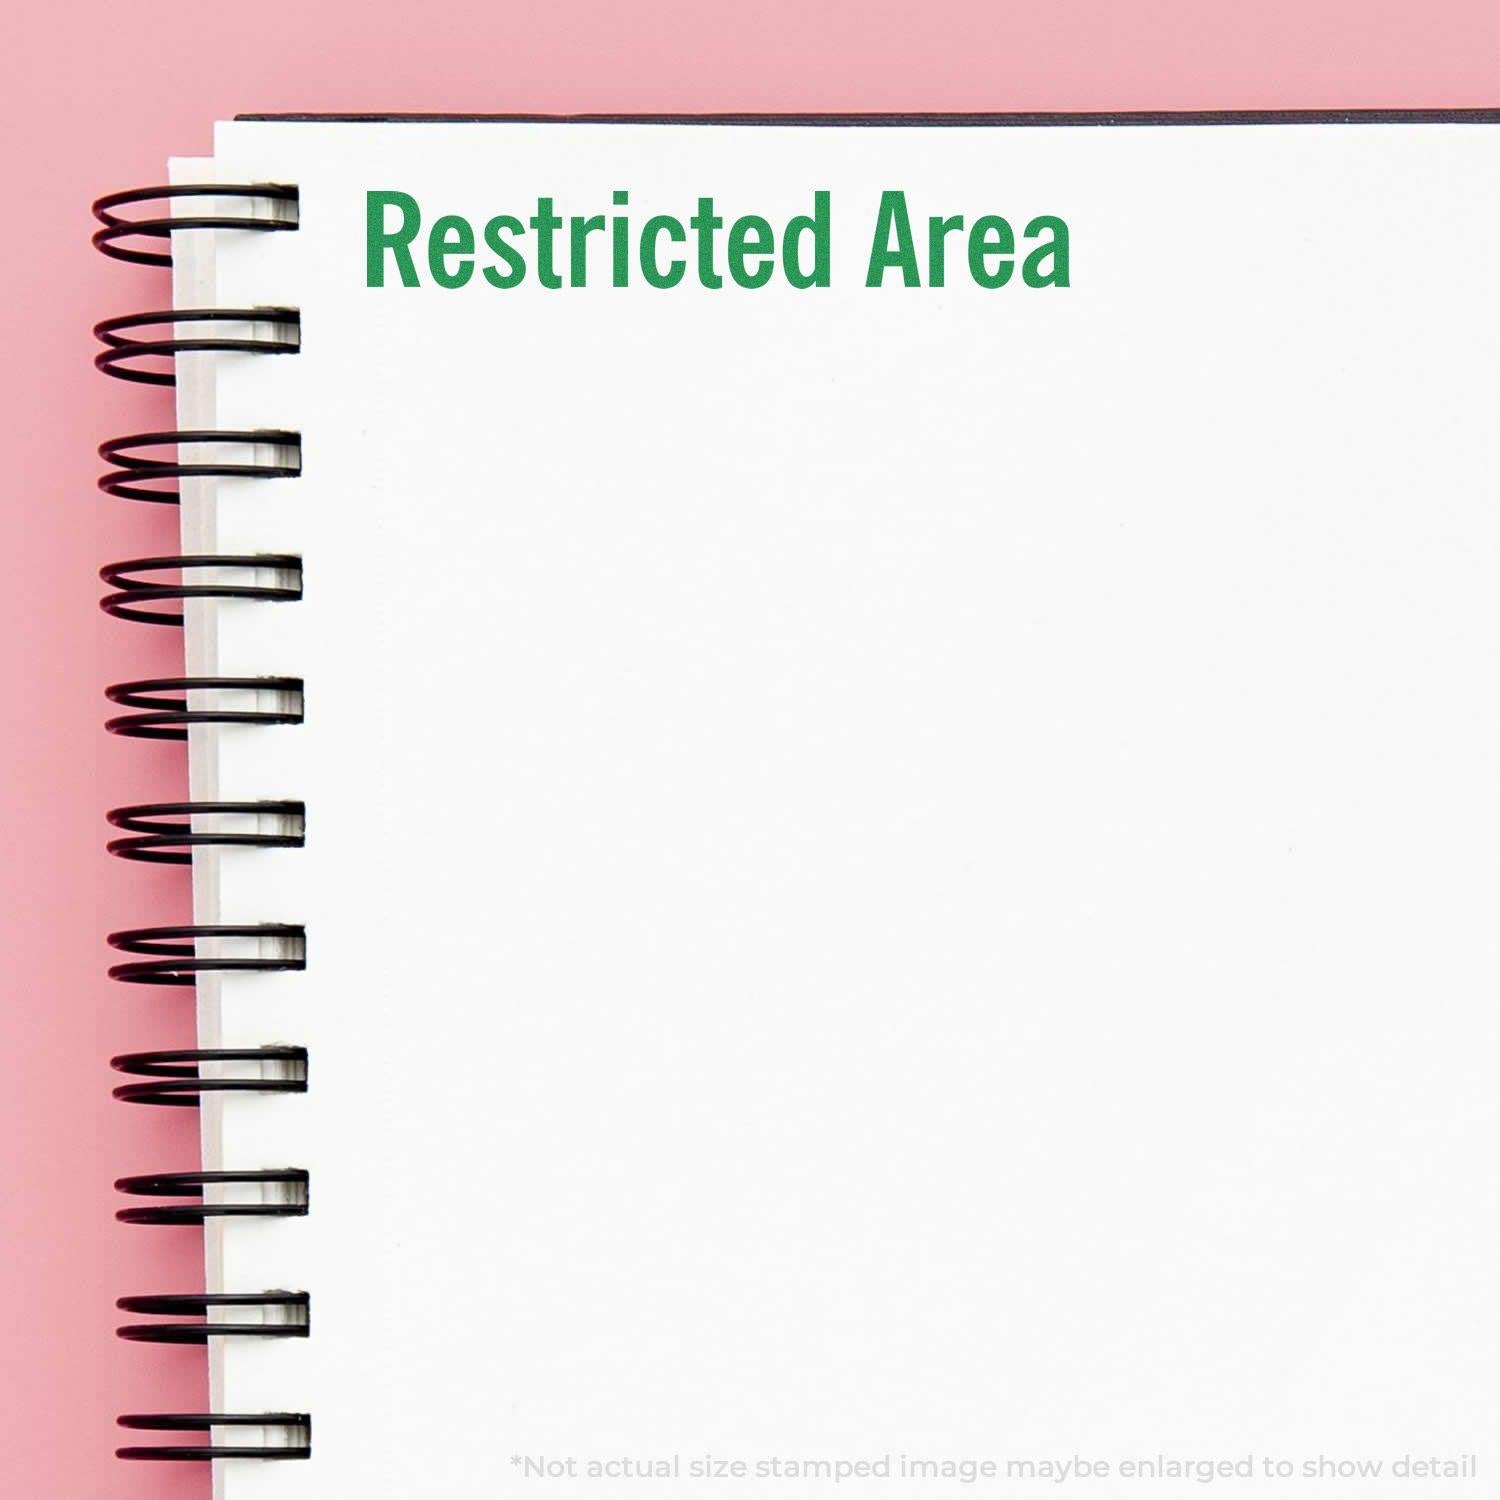 A stock office rubber stamp with a stamped image showing how the text "Restricted Area" in a large font is displayed after stamping.